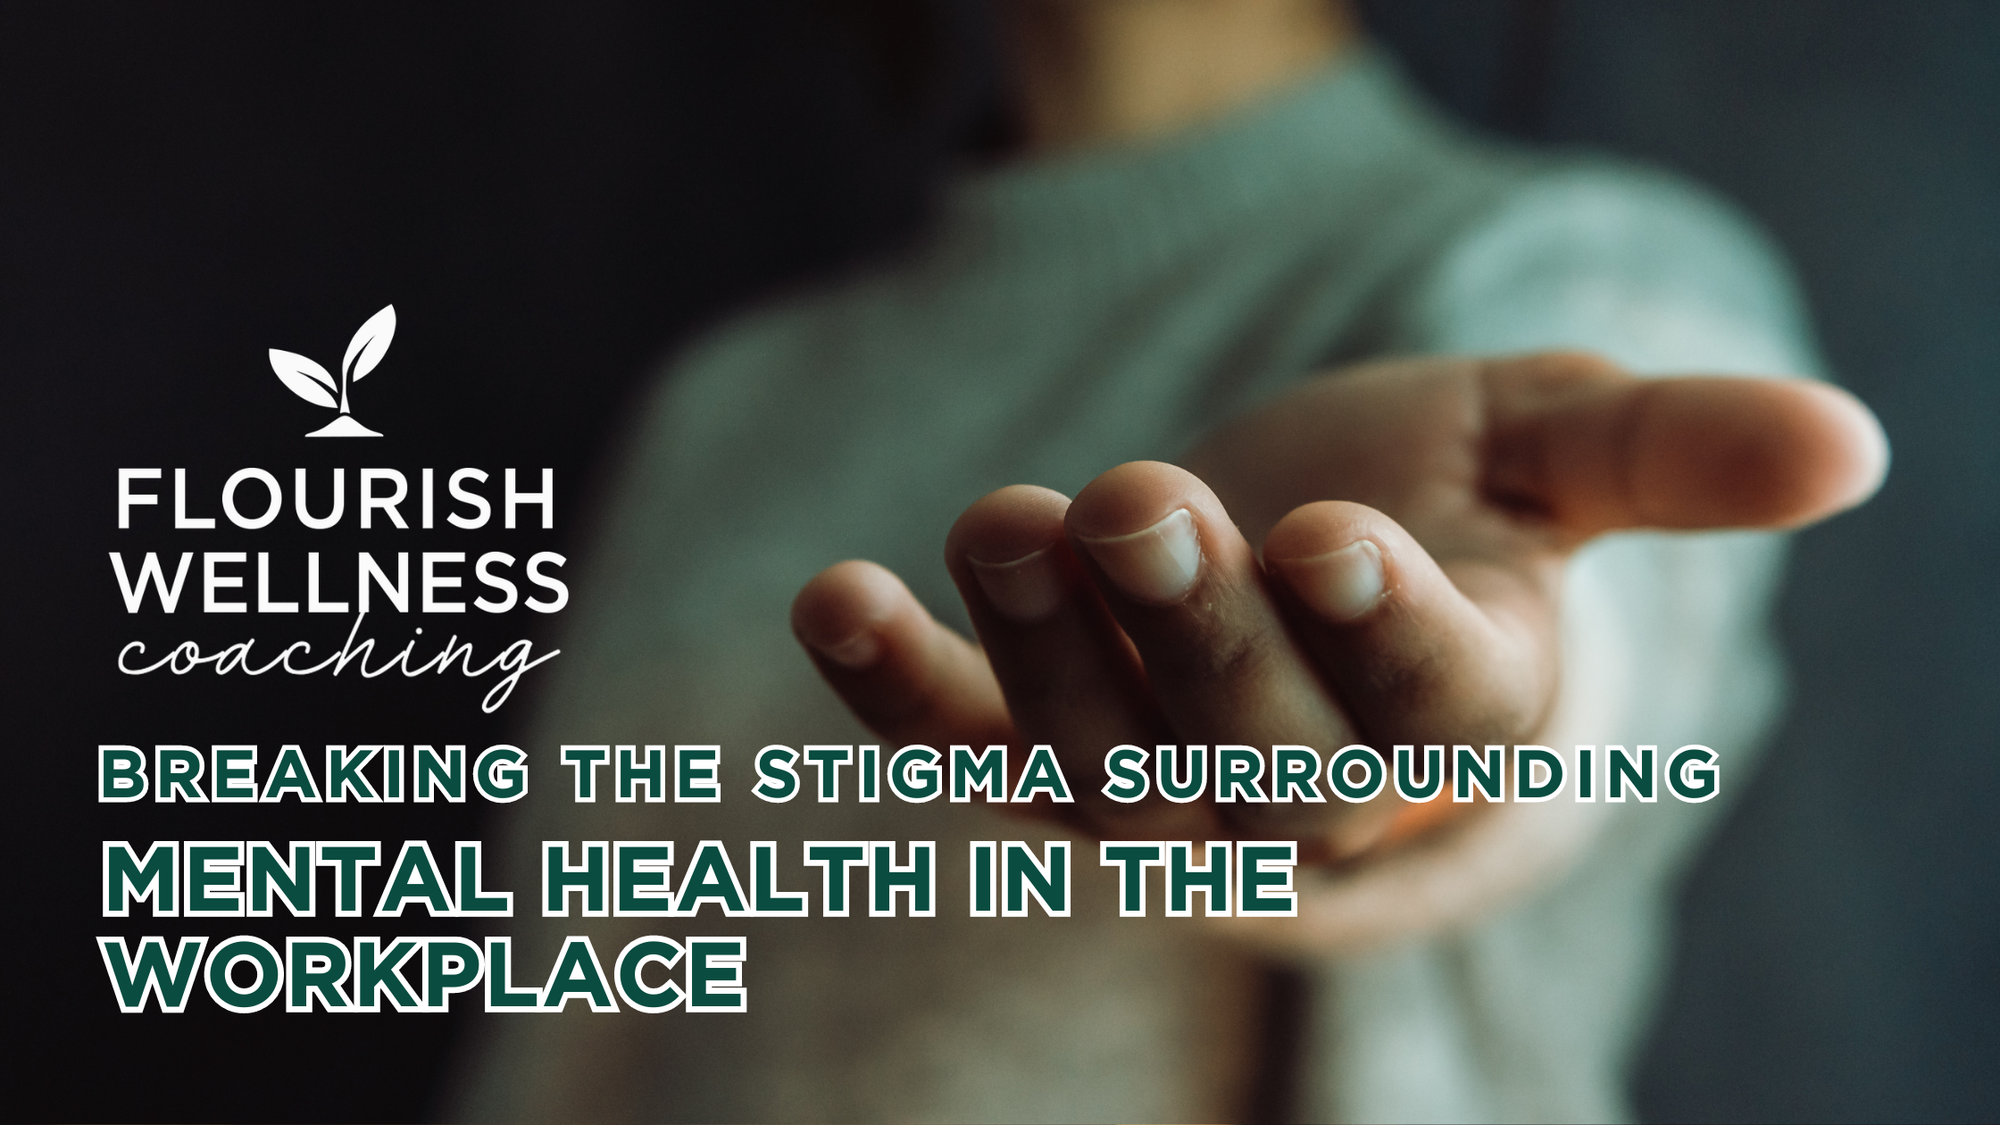 Breaking the Stigma Surrounding Mental Health in the Workplace.